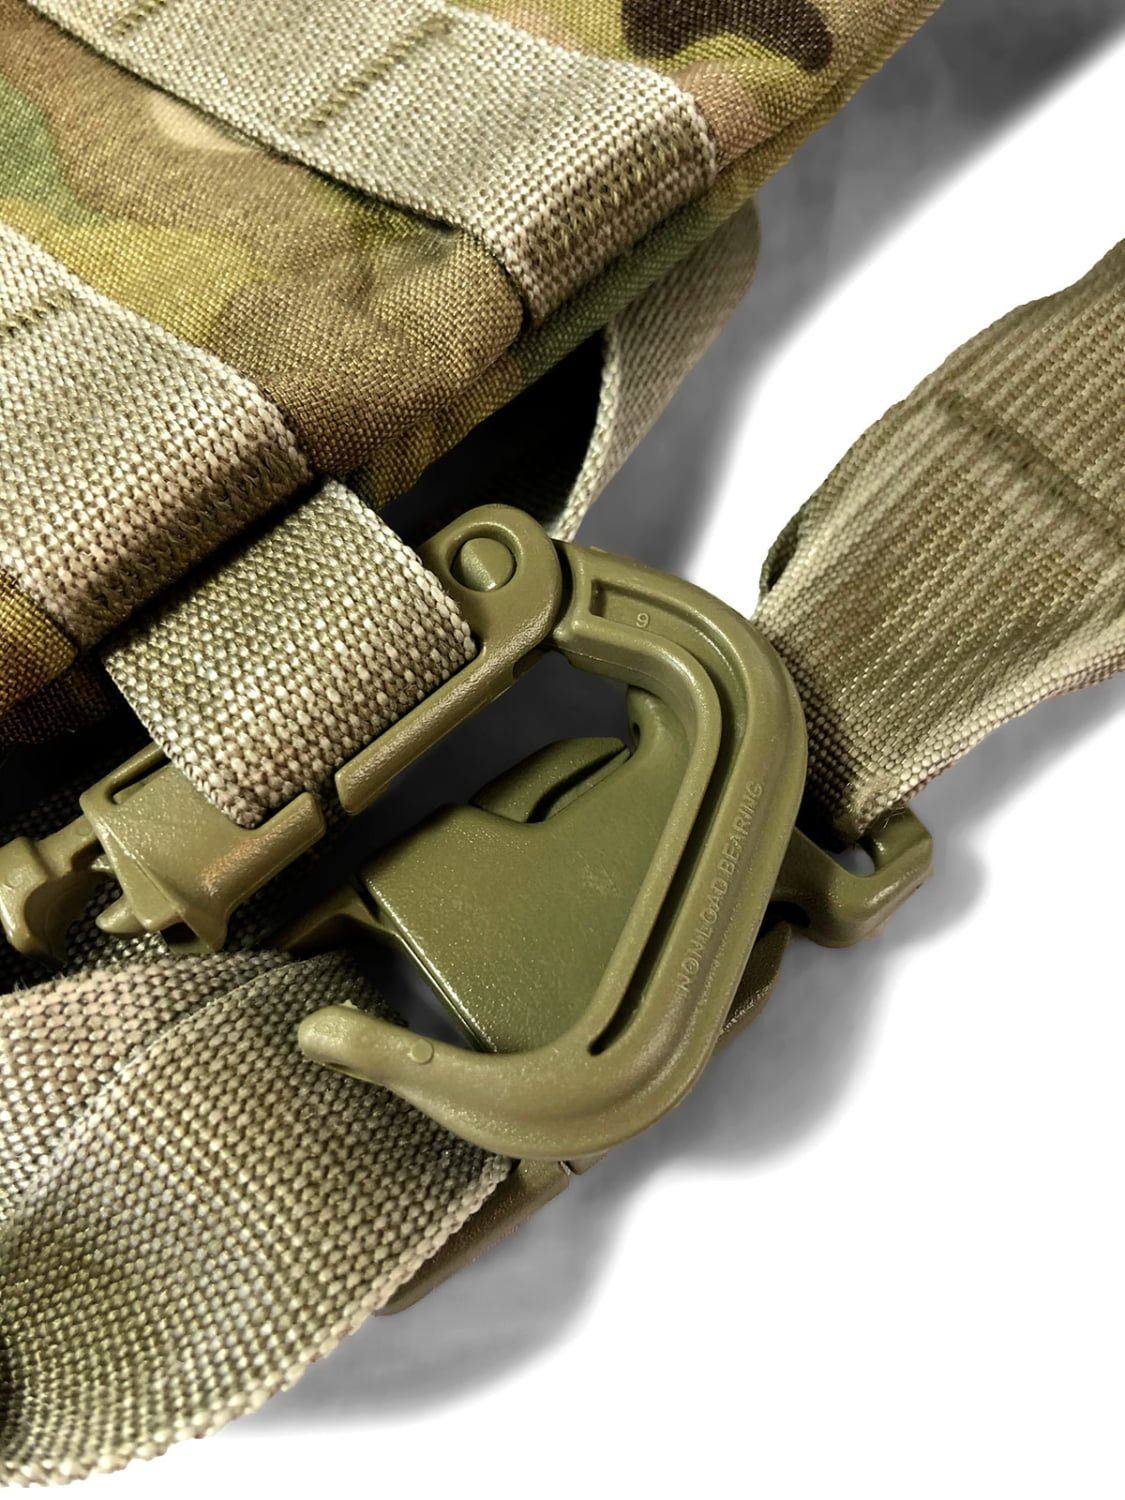 MOLLE II Hydration Carrier | System | Smith's Surplus